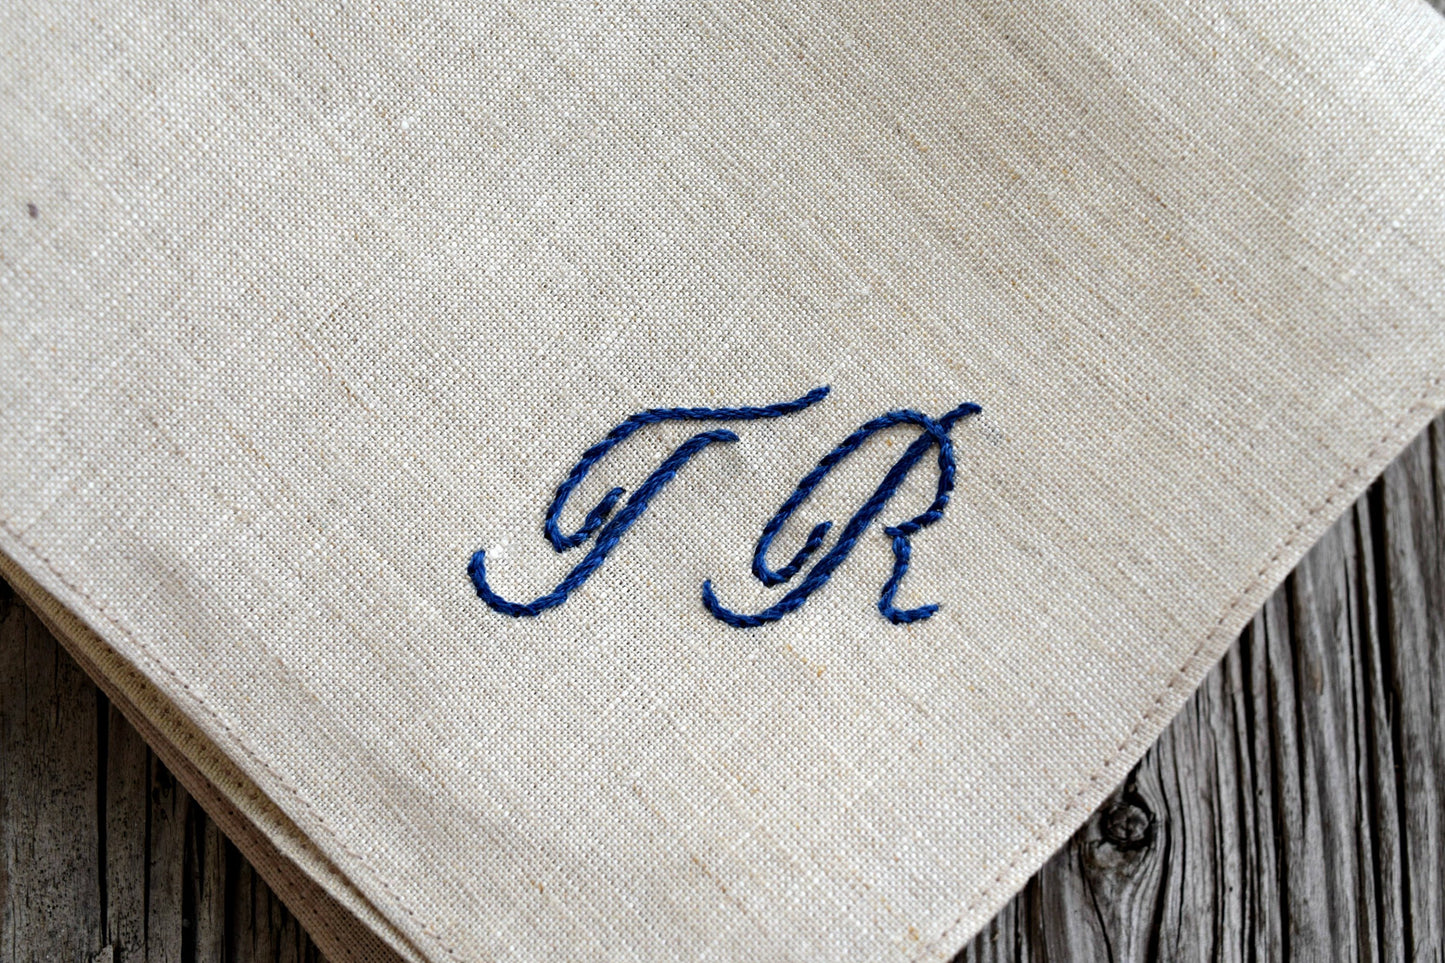 Oatmeal Linen Handkerchief Monogrammed with Two Initials: Simple and Sweet